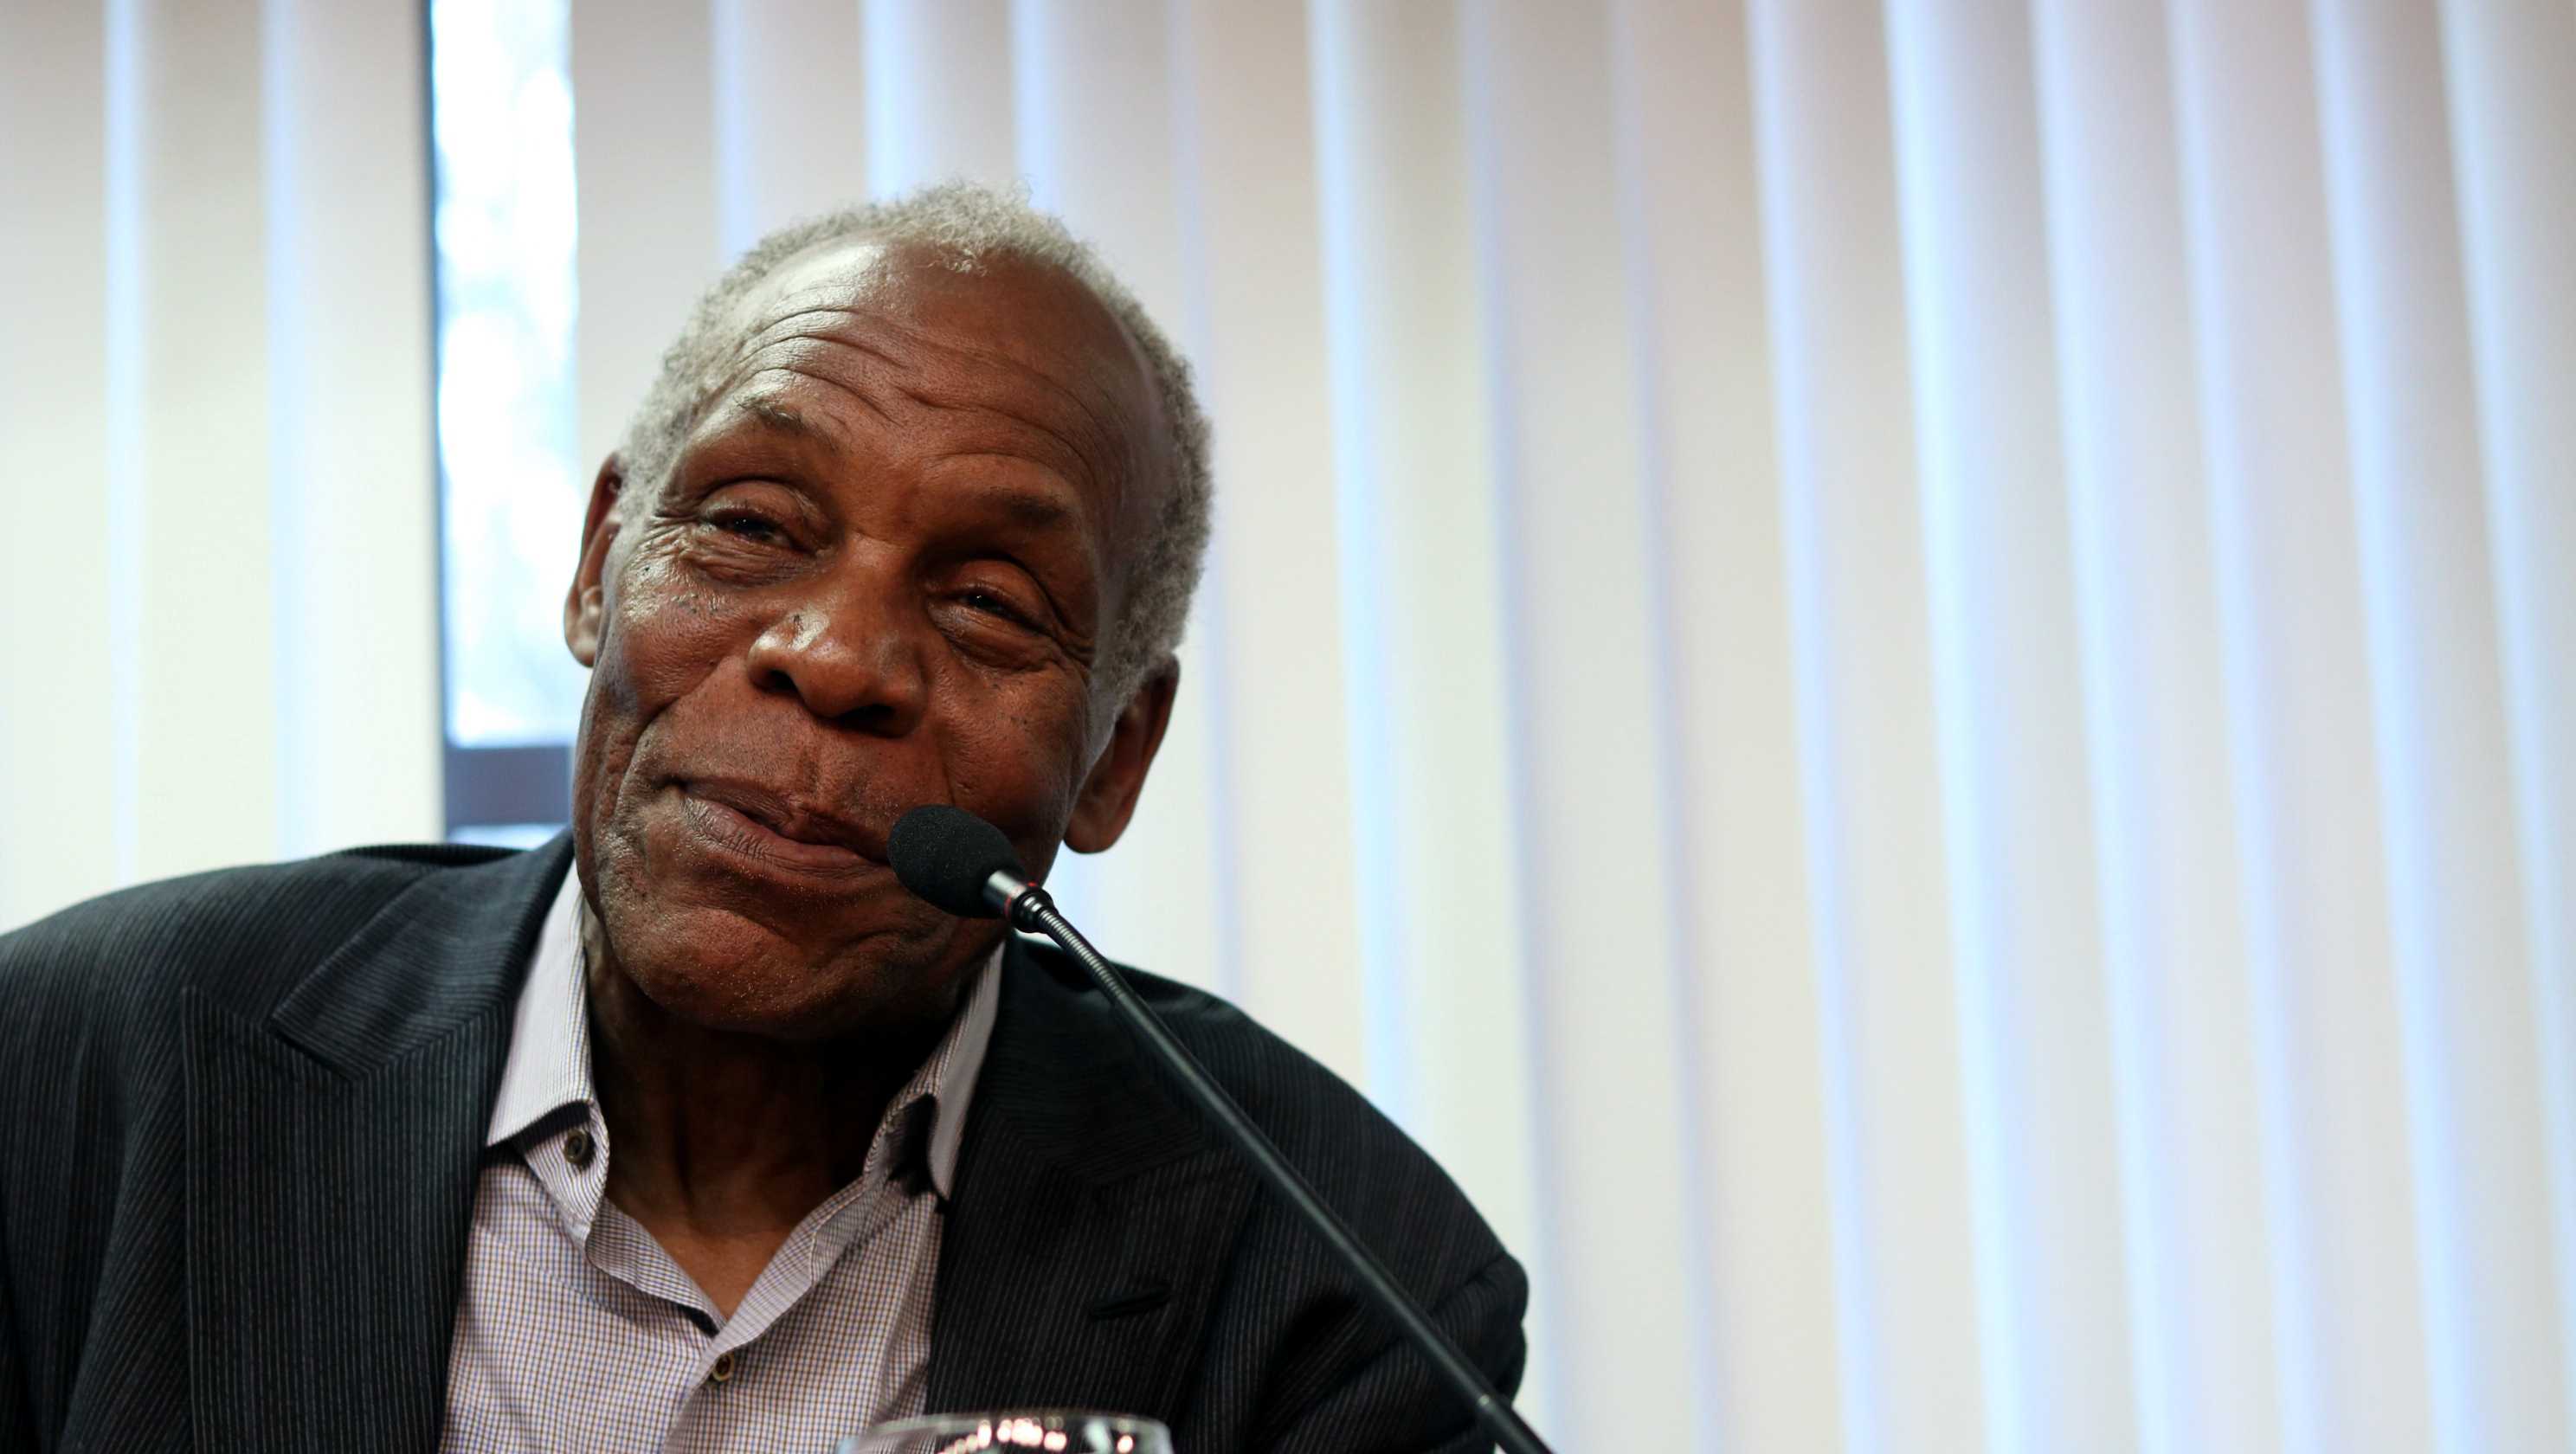 SF State alumnus Danny Glover speaks at the SF State Student Strike 50th anniversary event, held in the Conference Towers on campus in San Francisco, Calif., on Saturday, Nov. 10, 2018. (Evan Moses/ Golden Gate Xpress)